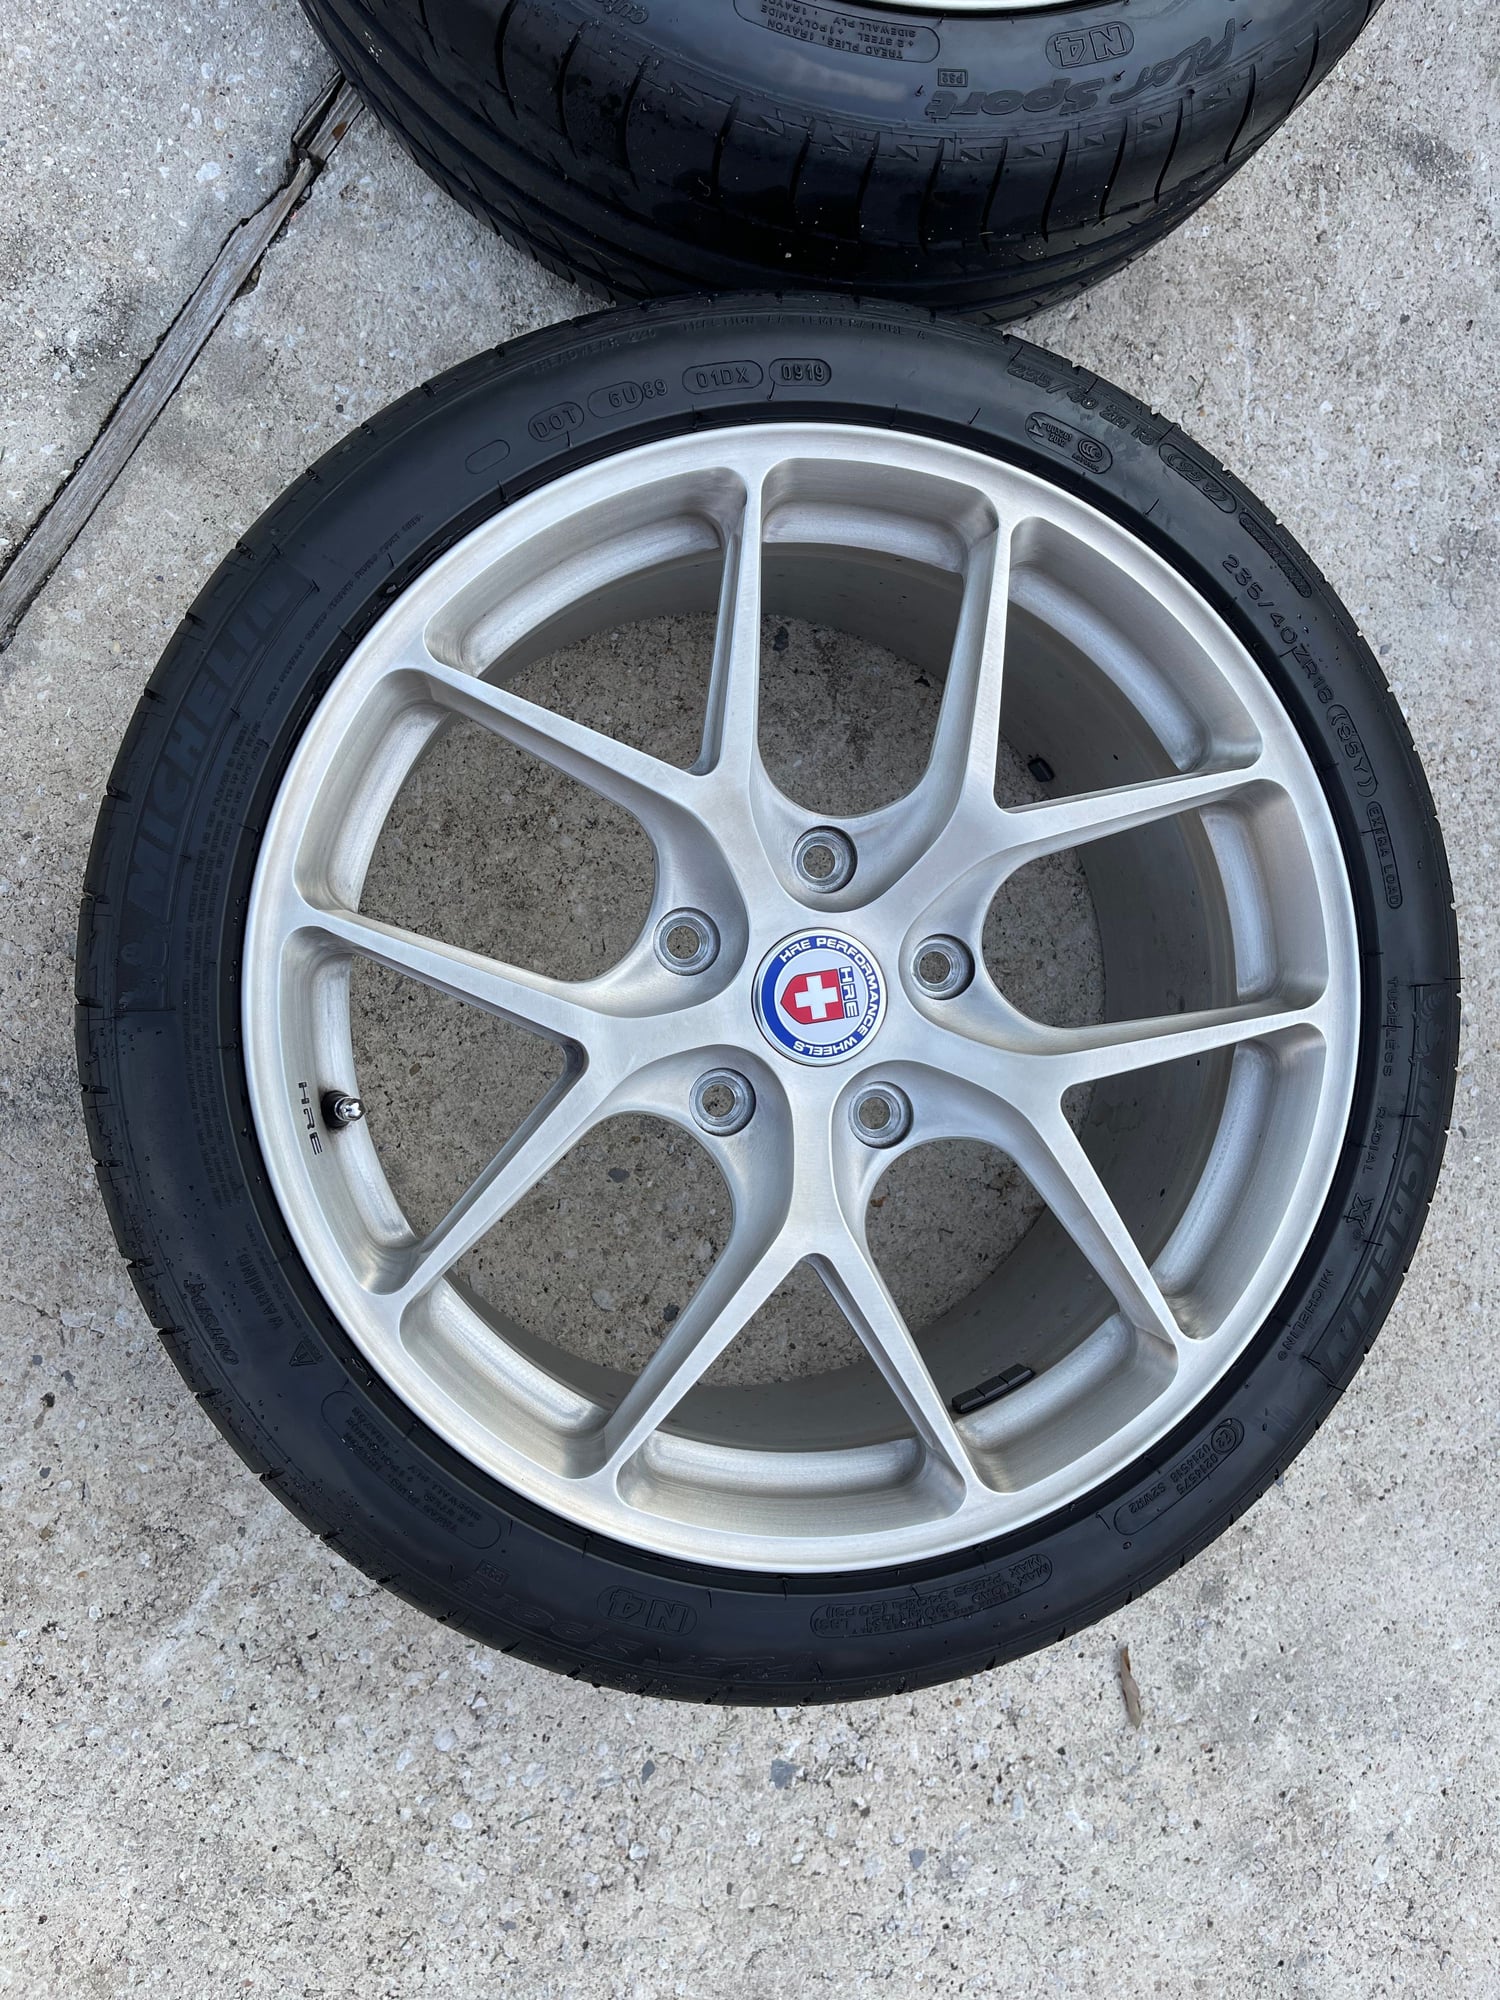 Wheels and Tires/Axles - 18" HRE R101 ultralight weight wheels w/Michelin PS2 tires - Used - 1995 to 1998 Porsche 911 - 2001 to 2005 Porsche 911 - Mobile, AL AL, United States